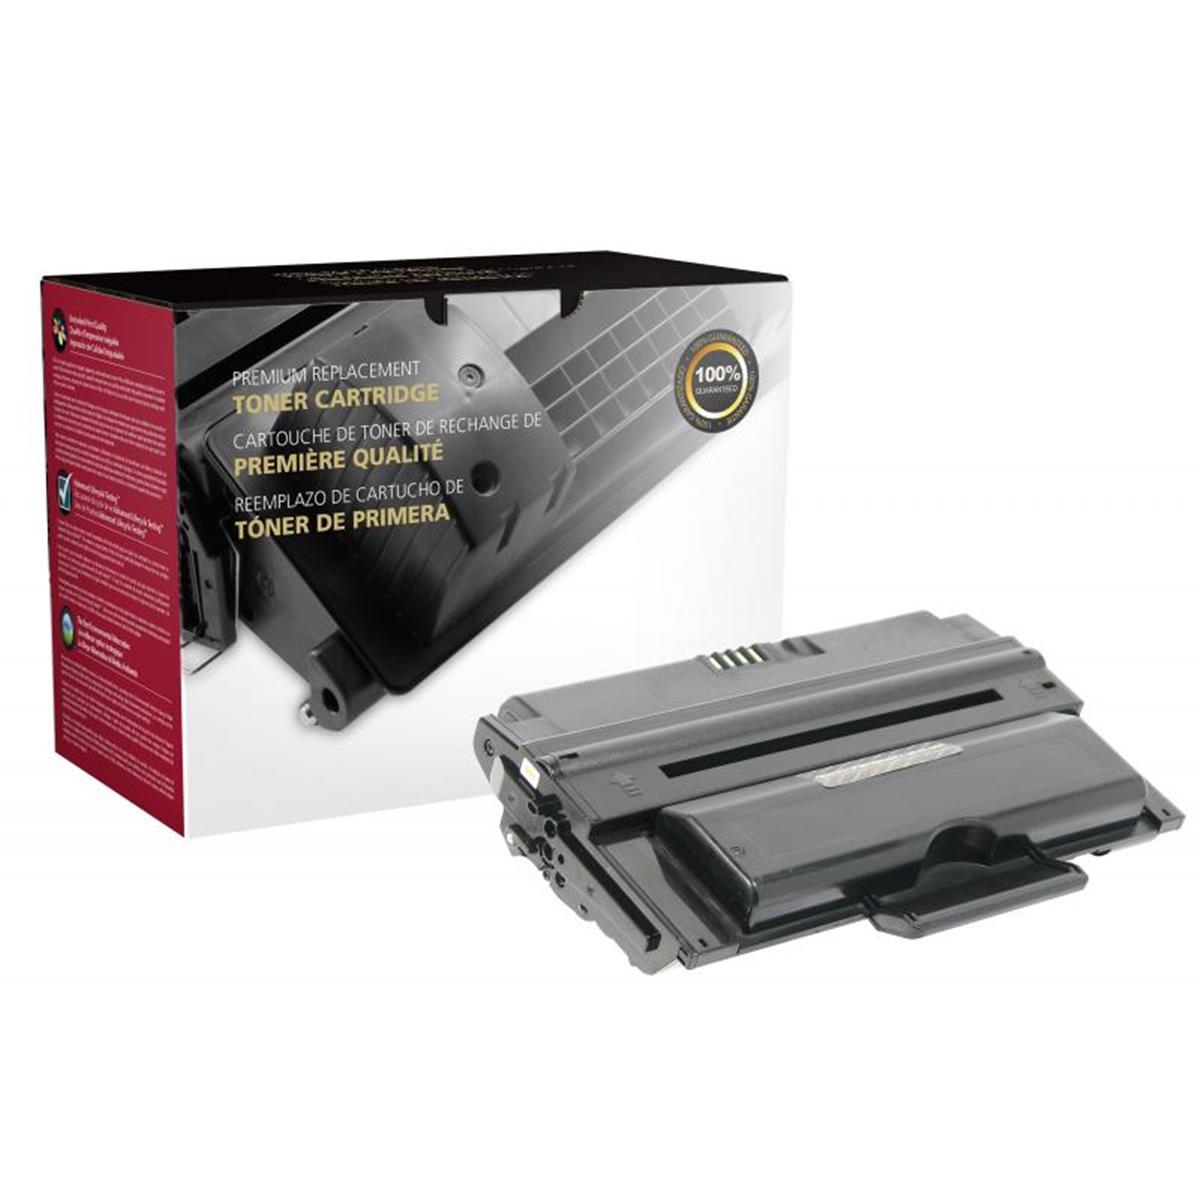 Picture of Dell 200085 High Yield Toner Cartridge for Dell 2335DN